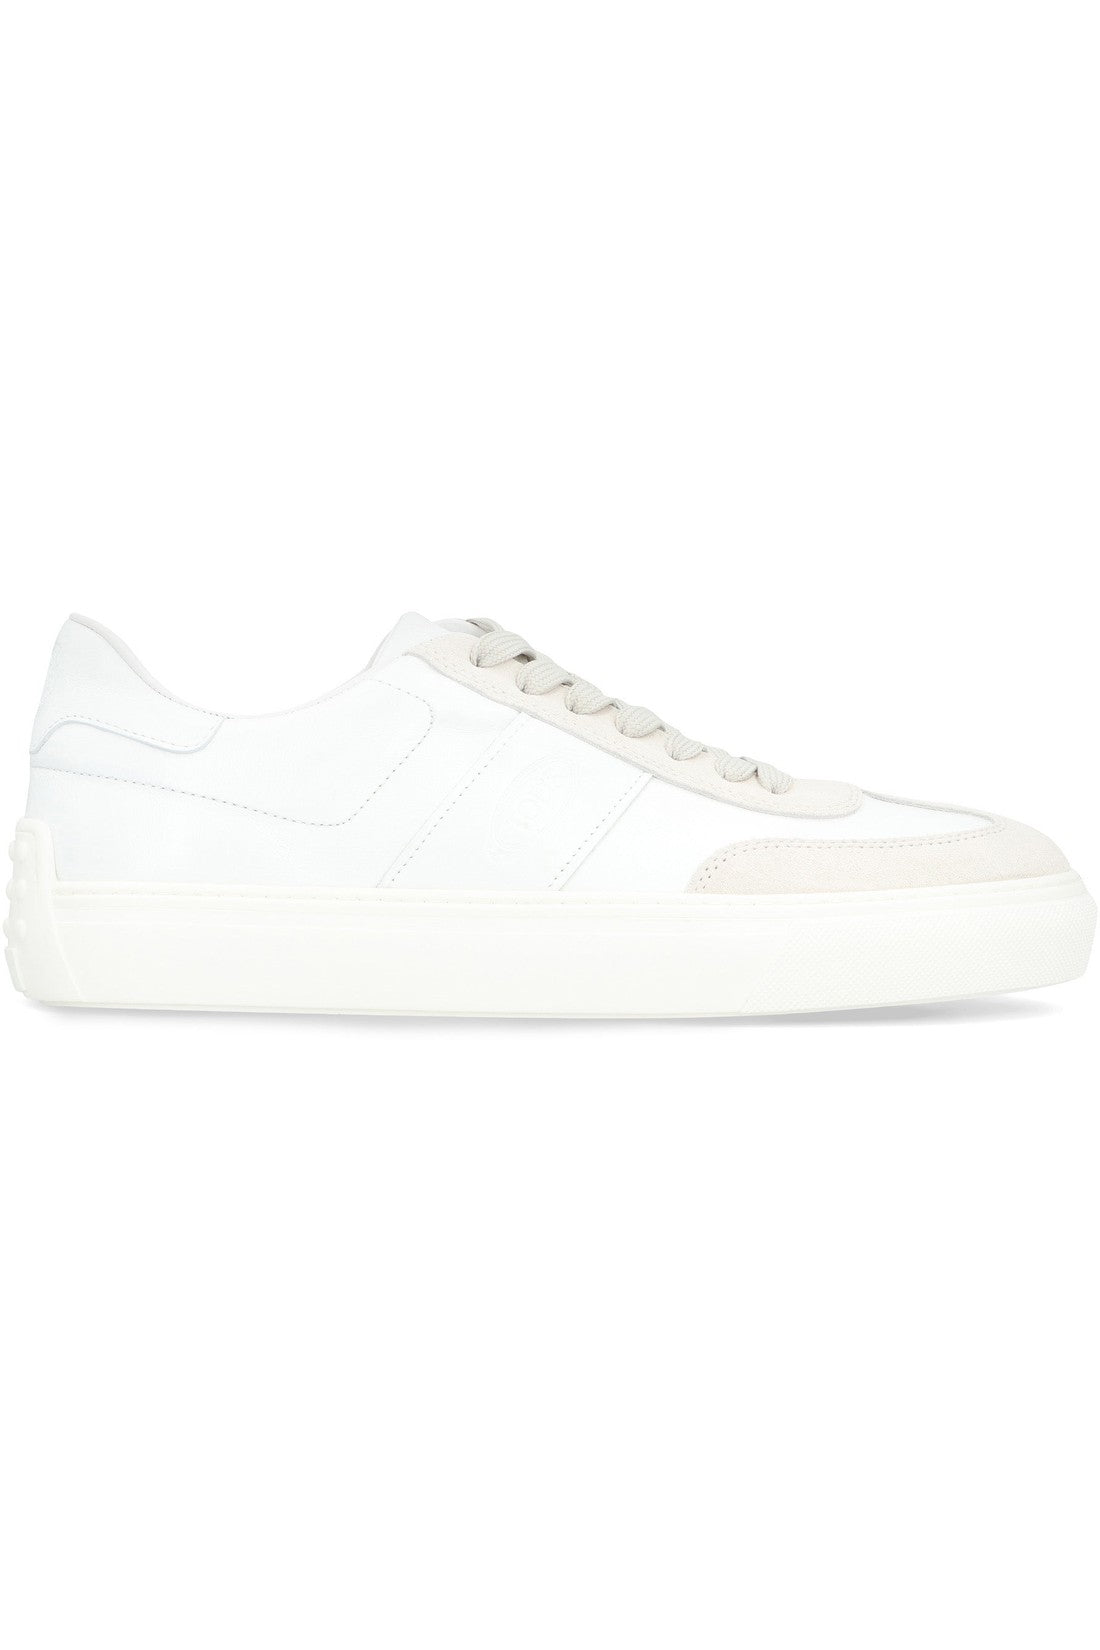 Tod's-OUTLET-SALE-Leather low-top sneakers-ARCHIVIST